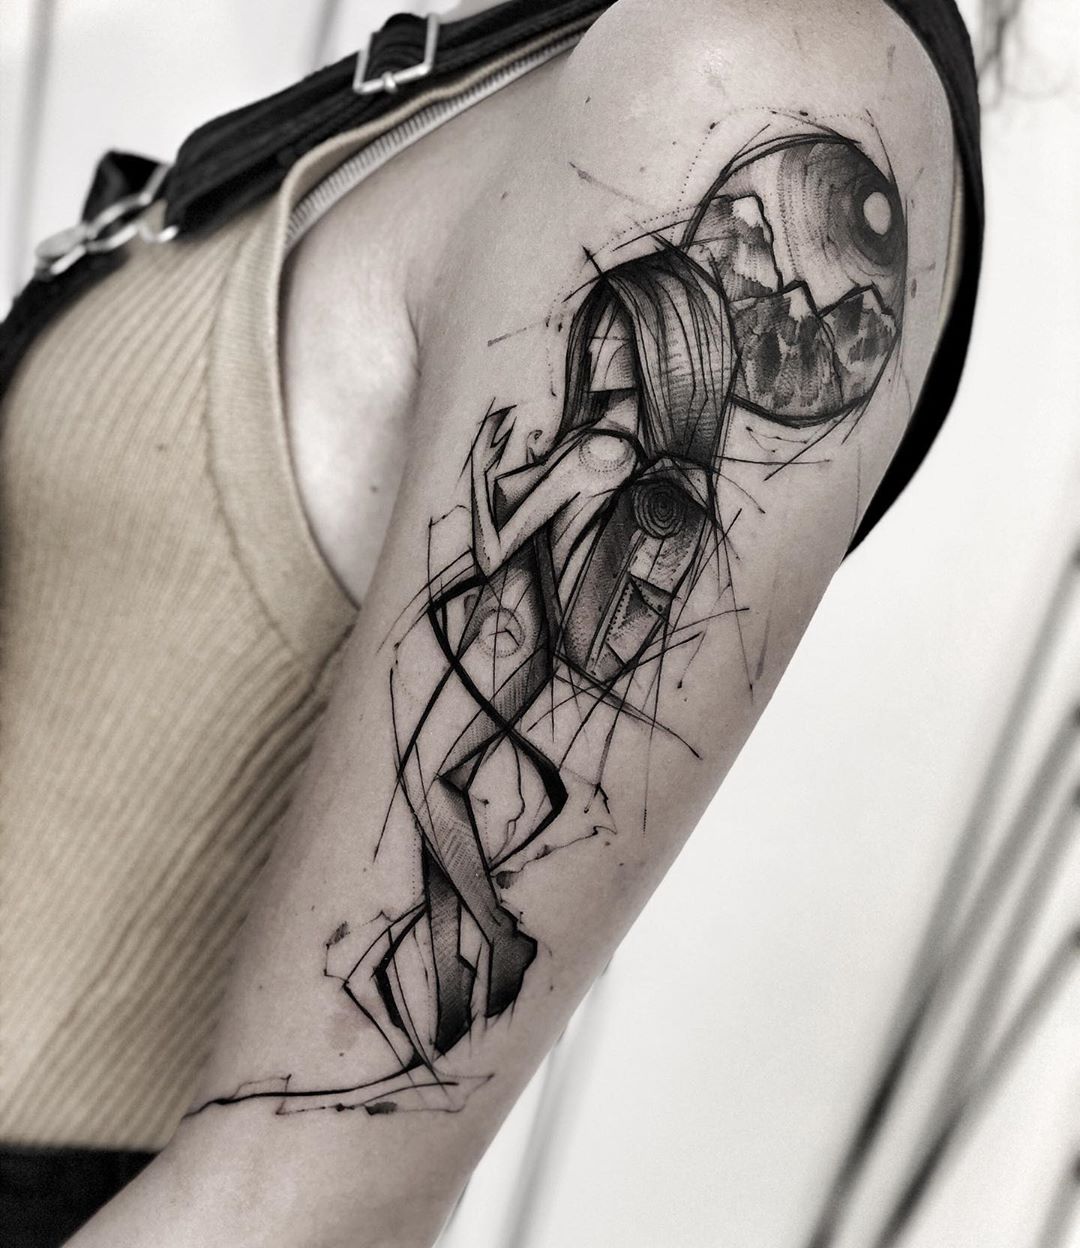 Inez Janiak's Sketch Tattoos Are Perfectly Imperfect